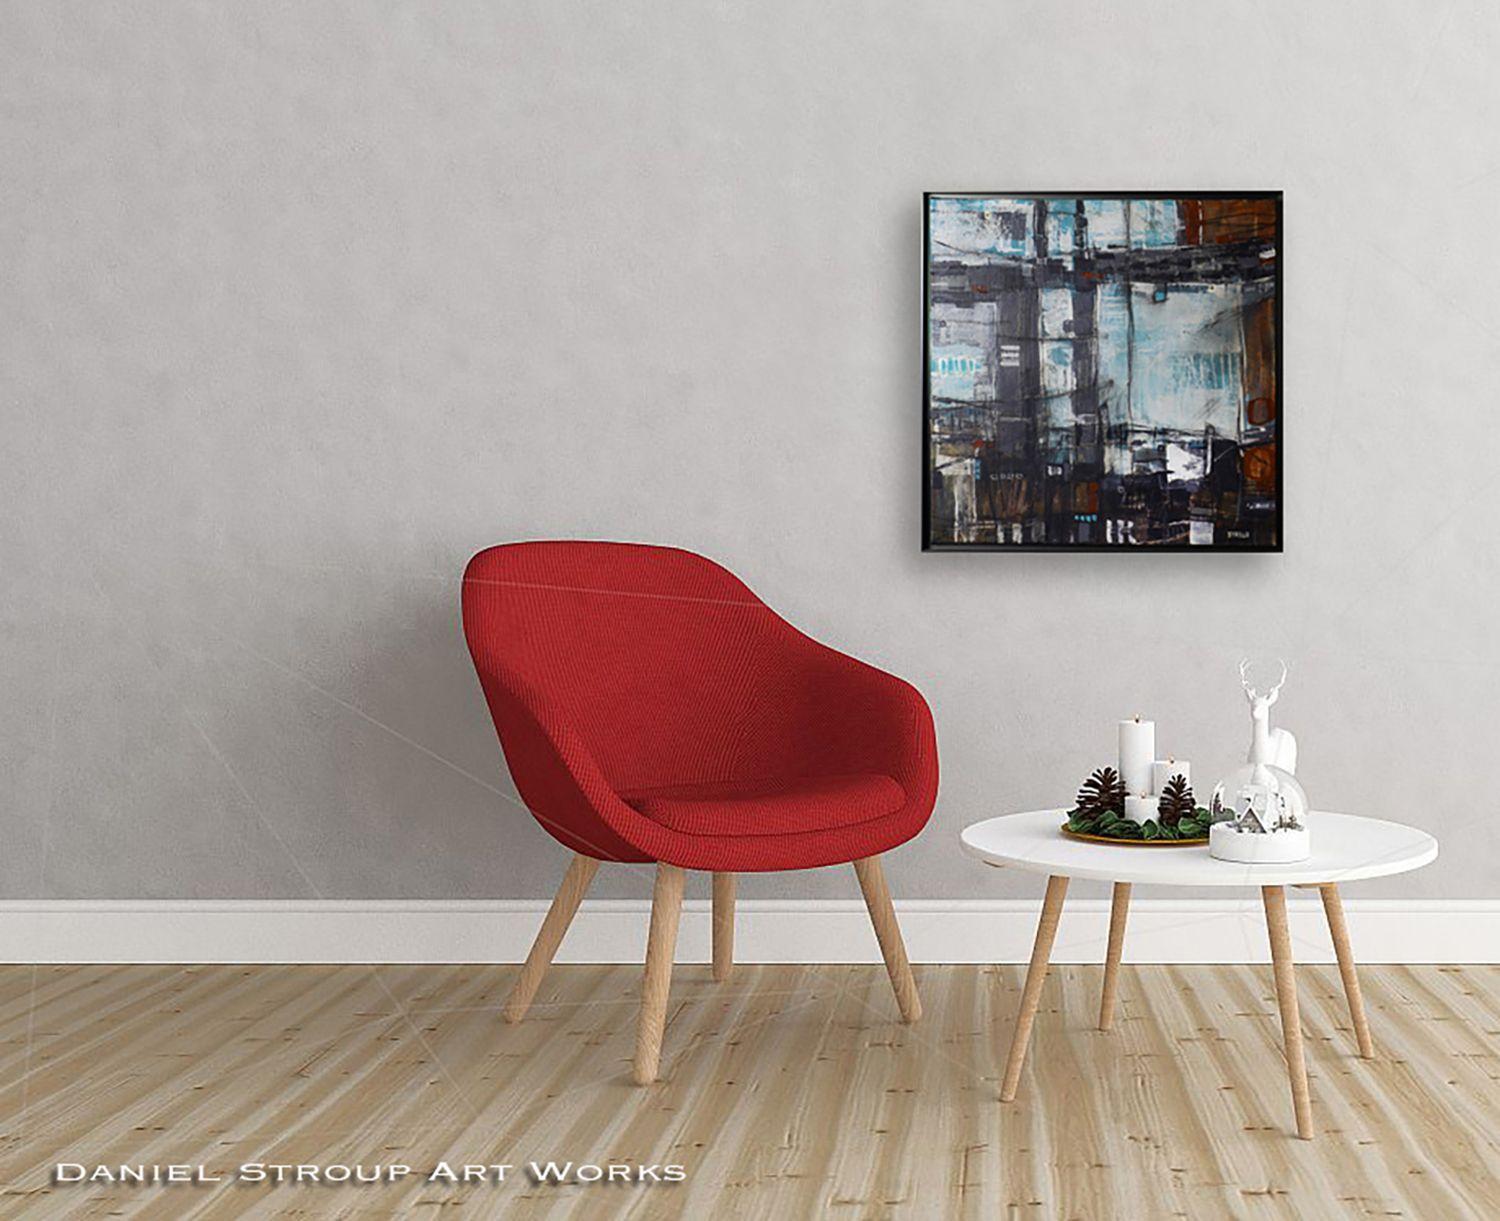 Dystopian City of the future and a shout out to the Rolling Stones. This modern abstract impressionist work is highly textured and will match any decor in office, den, or entryway. Blacks, whites, and grey with just a splash of color.    This